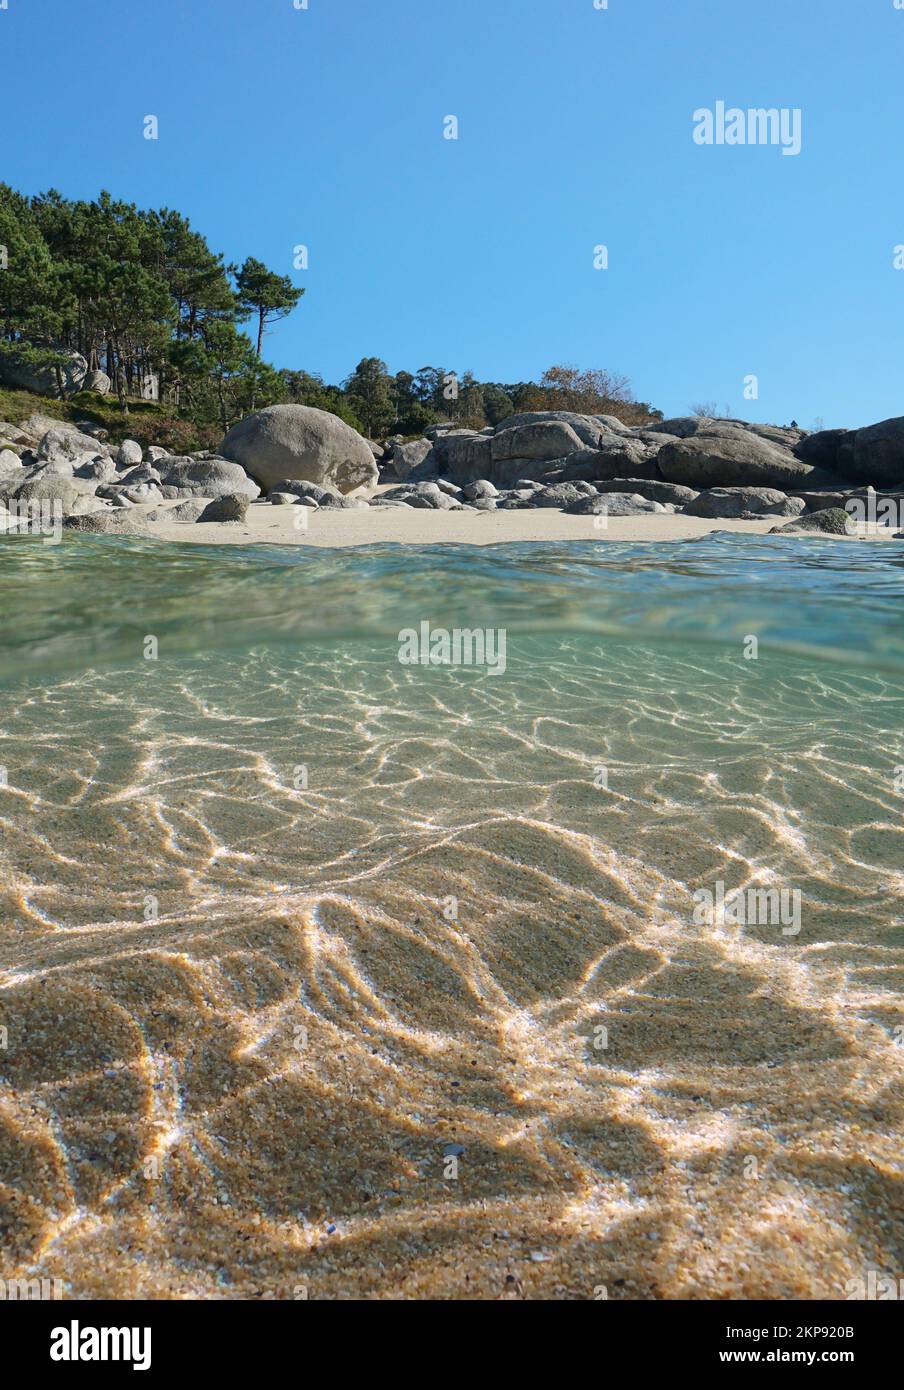 Beach with rocks and sand underwater, sea shore over and under water surface, split level view, Atlantic ocean, Spain, Galicia, Rias Baixas Stock Photo